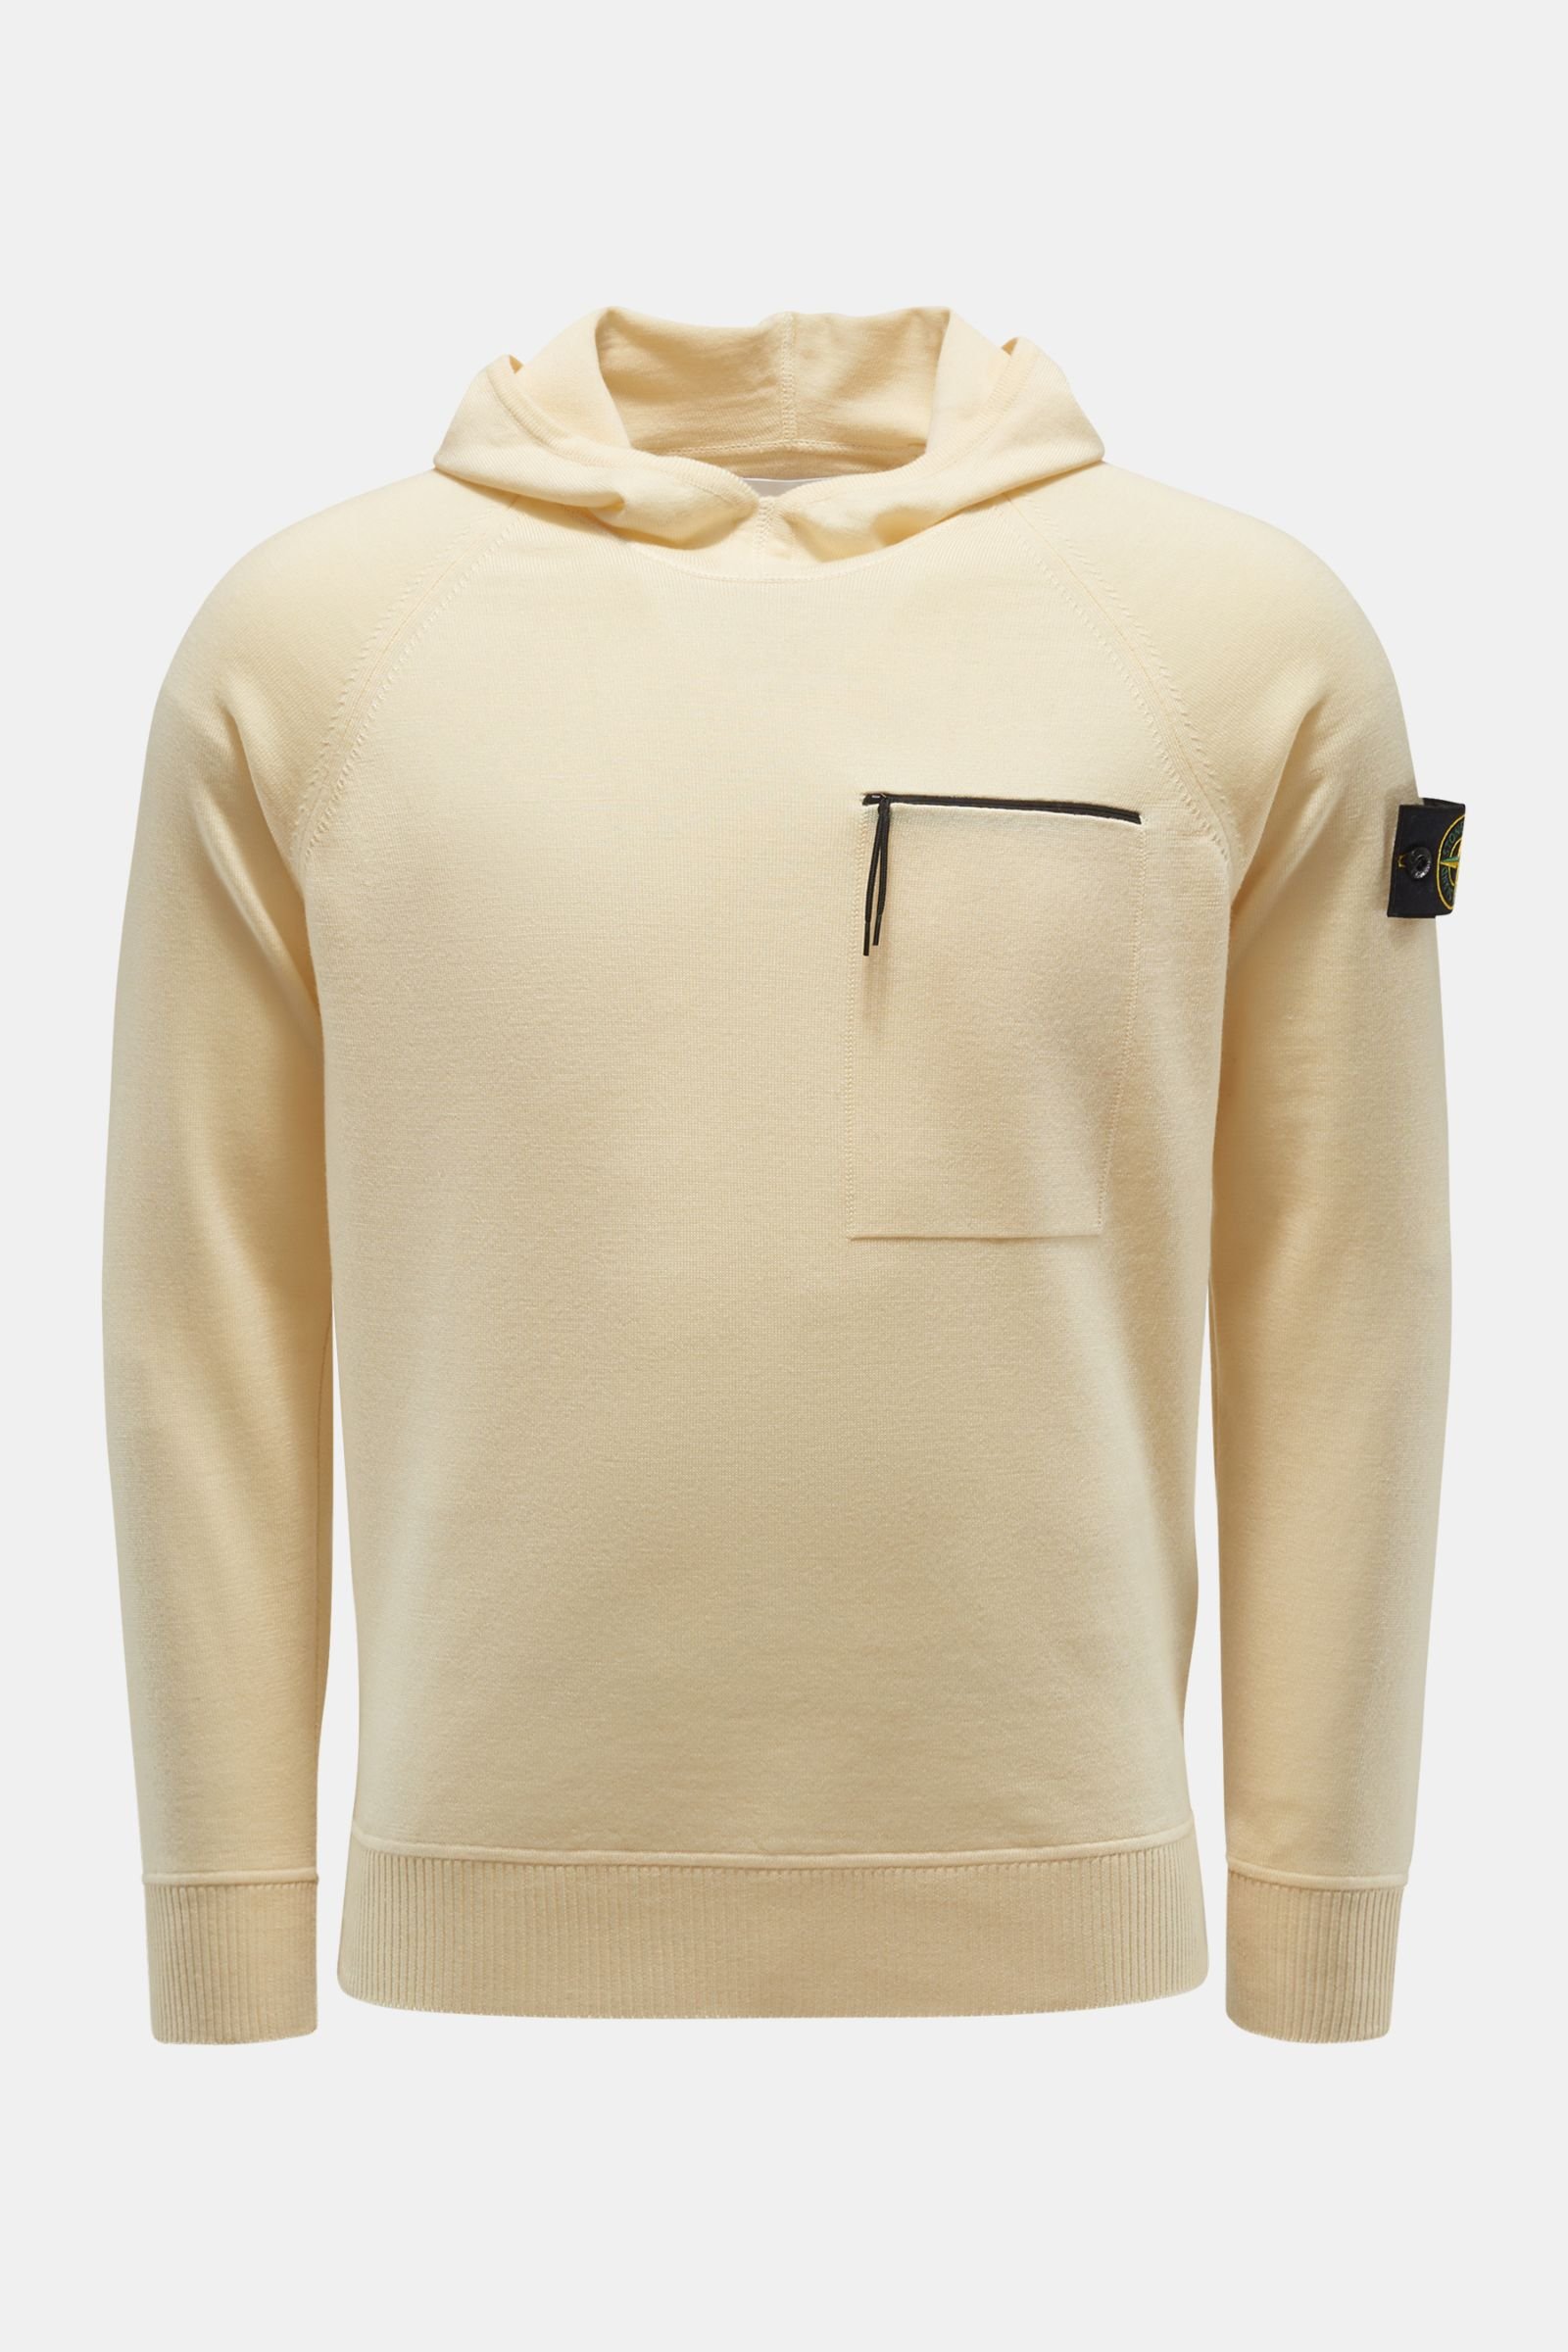 Hooded jumper pastel yellow